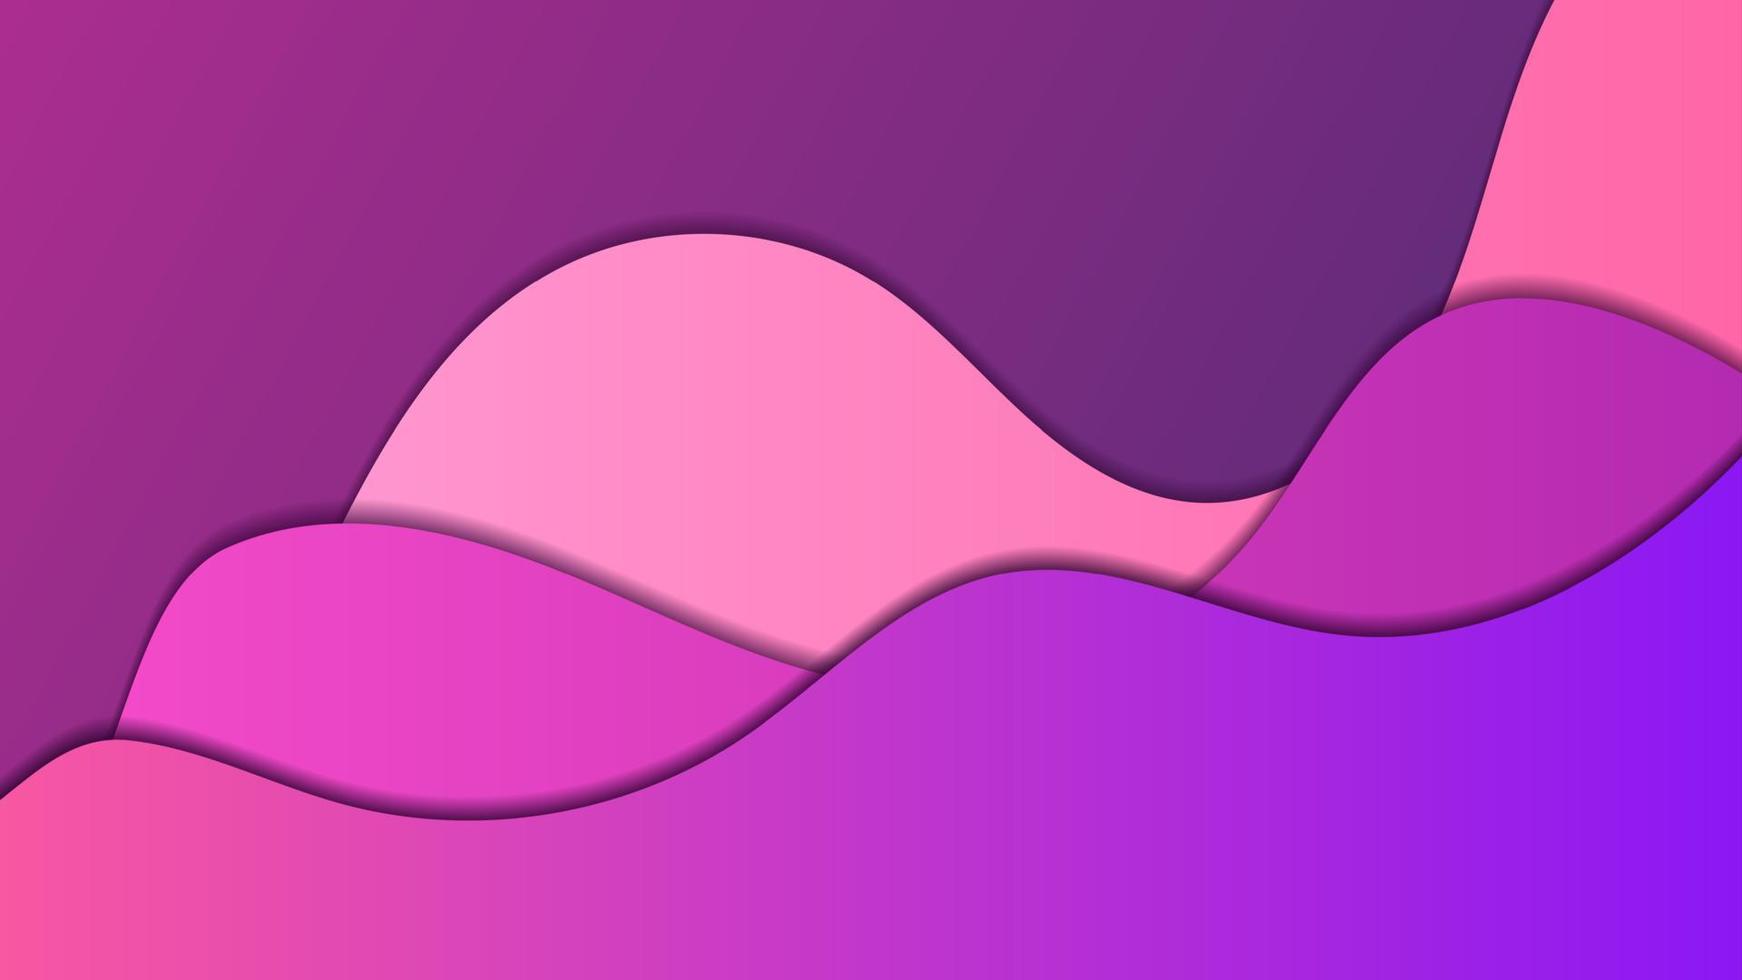 Modern Glow Abstract Wave Papercut Violet Background. Geometric Dynamic Gradient Purple Wave Shapes Design. Can Be Used As Banner, Motion, Frame Or Website Template vector